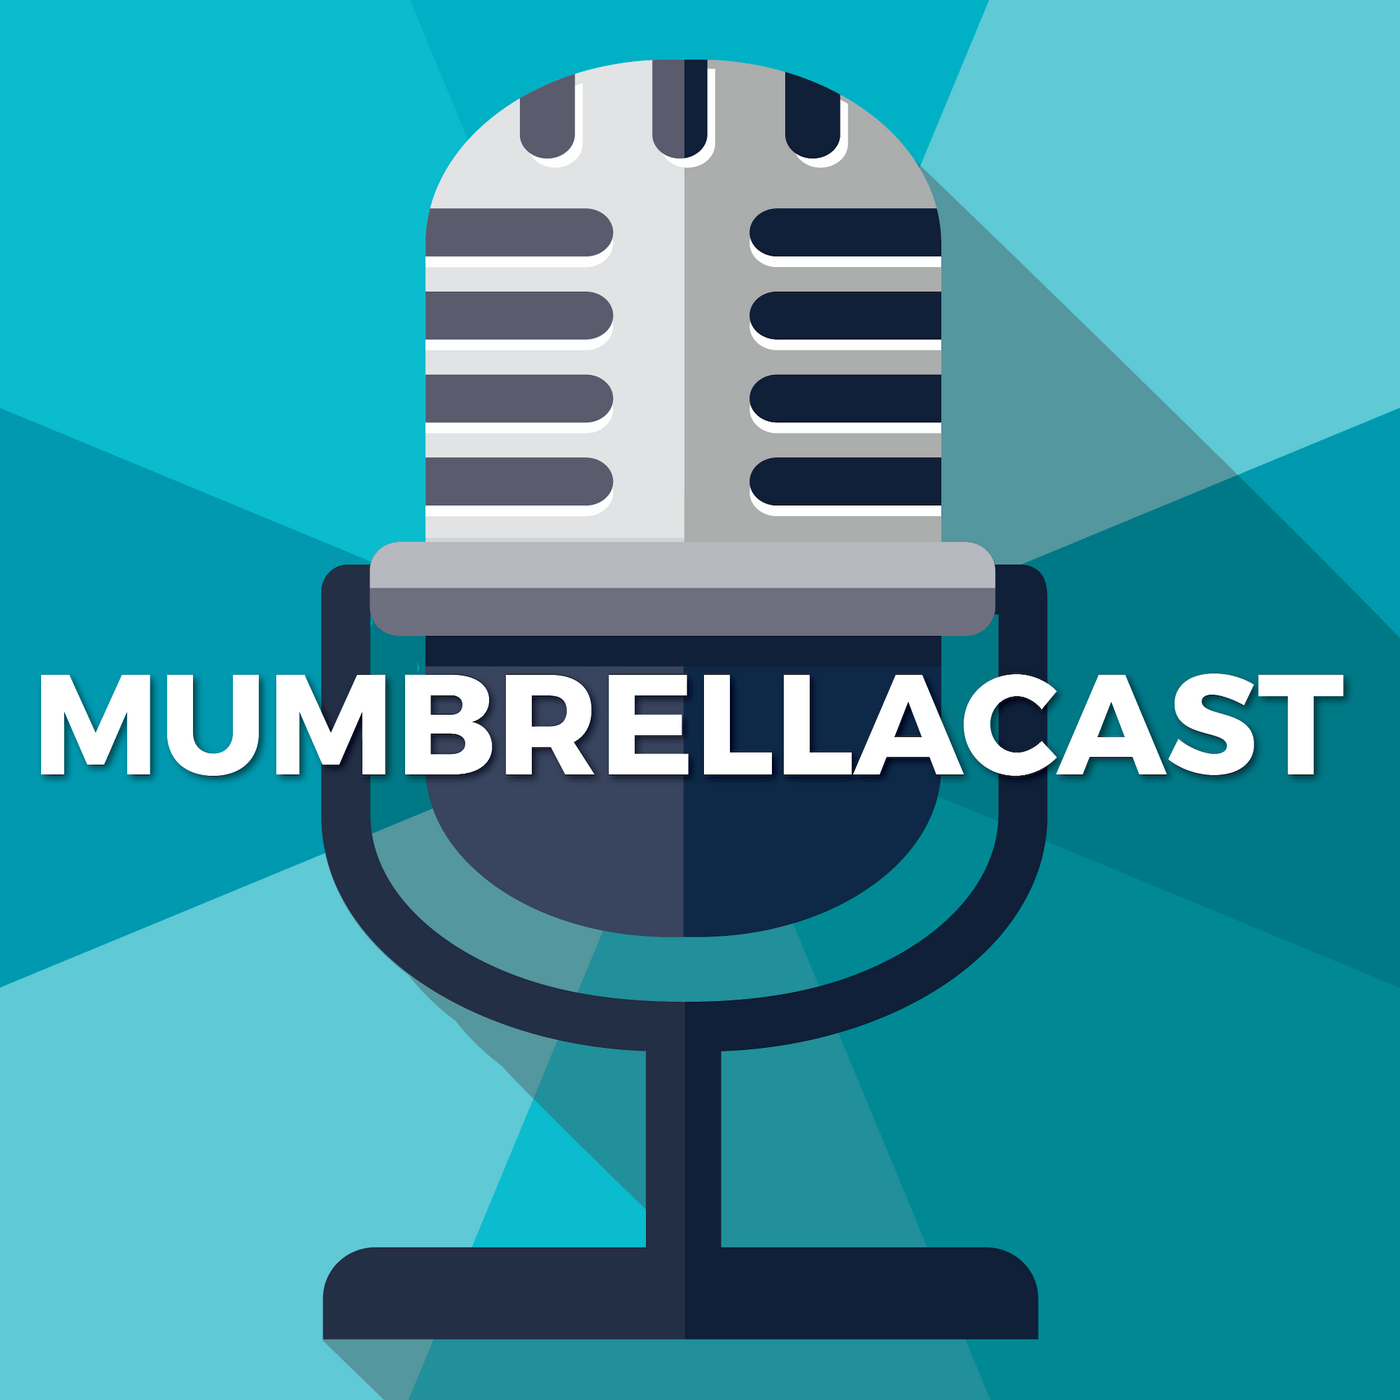 Mumbrellacast: Ten In 2020, Big CMO Moves, 'Wang Watch', And We Sit Down With Bachelorette Angie Kent